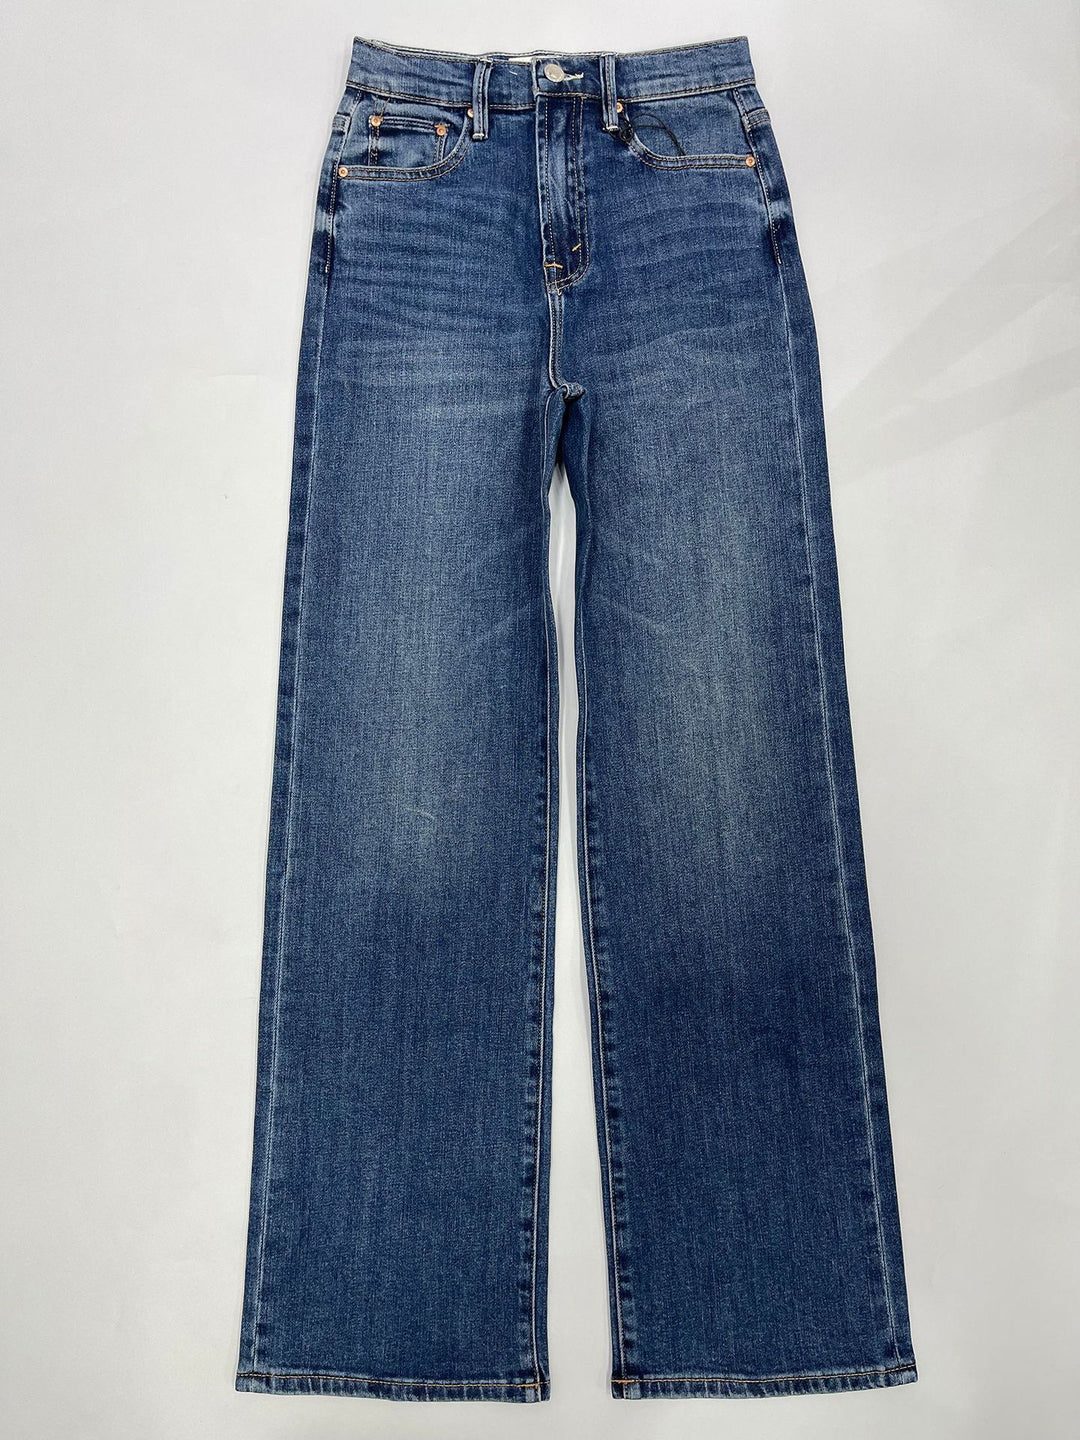 High Waist Women's Versatile Straight Jeans| All For Me Today